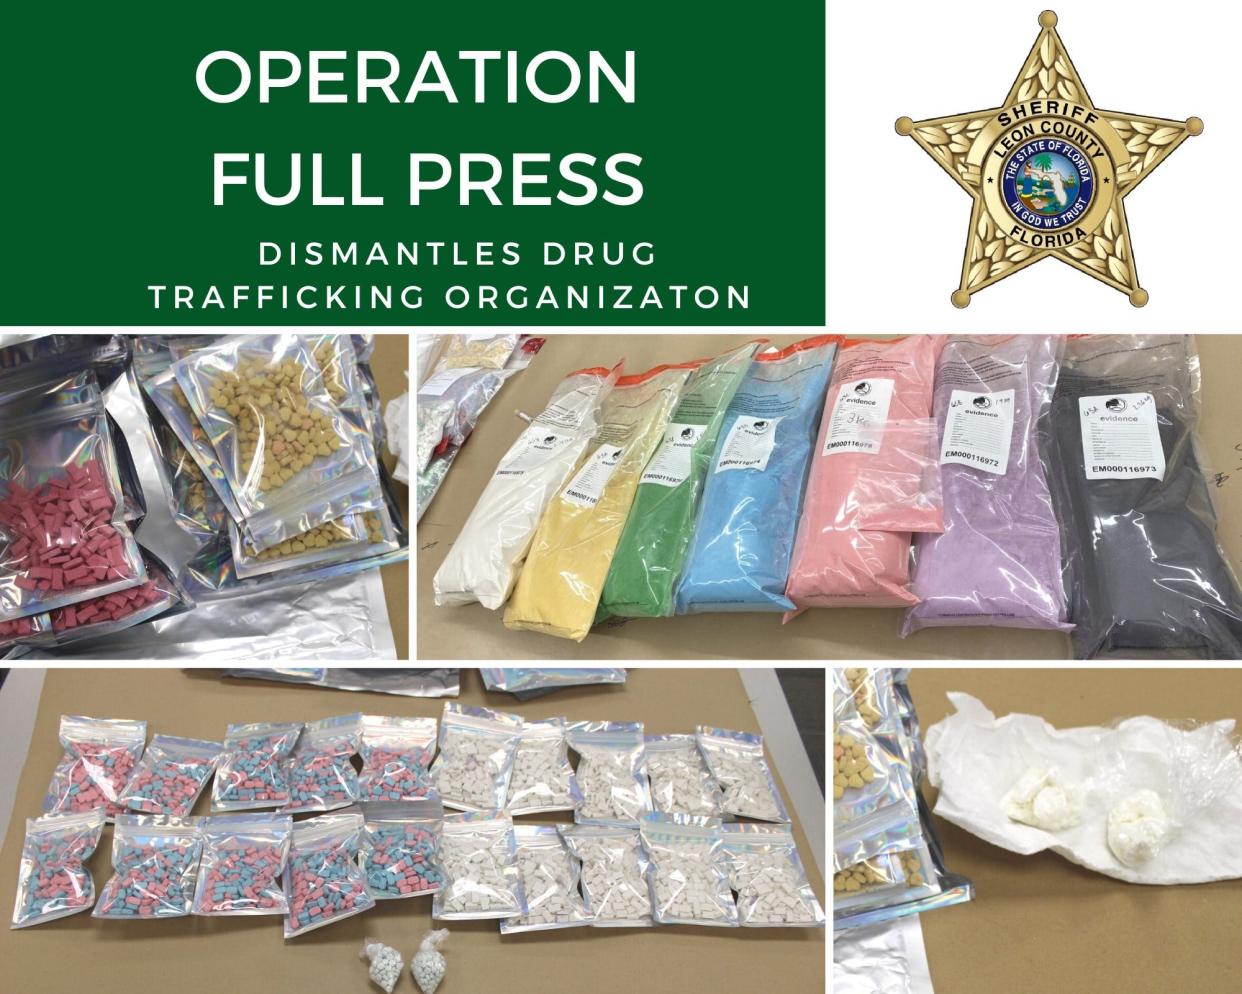 Two people were sentenced to prison in connection with a major drug bust in August. Jeffrey and Charice Williams  pleaded guilty to drug trafficking and other charges